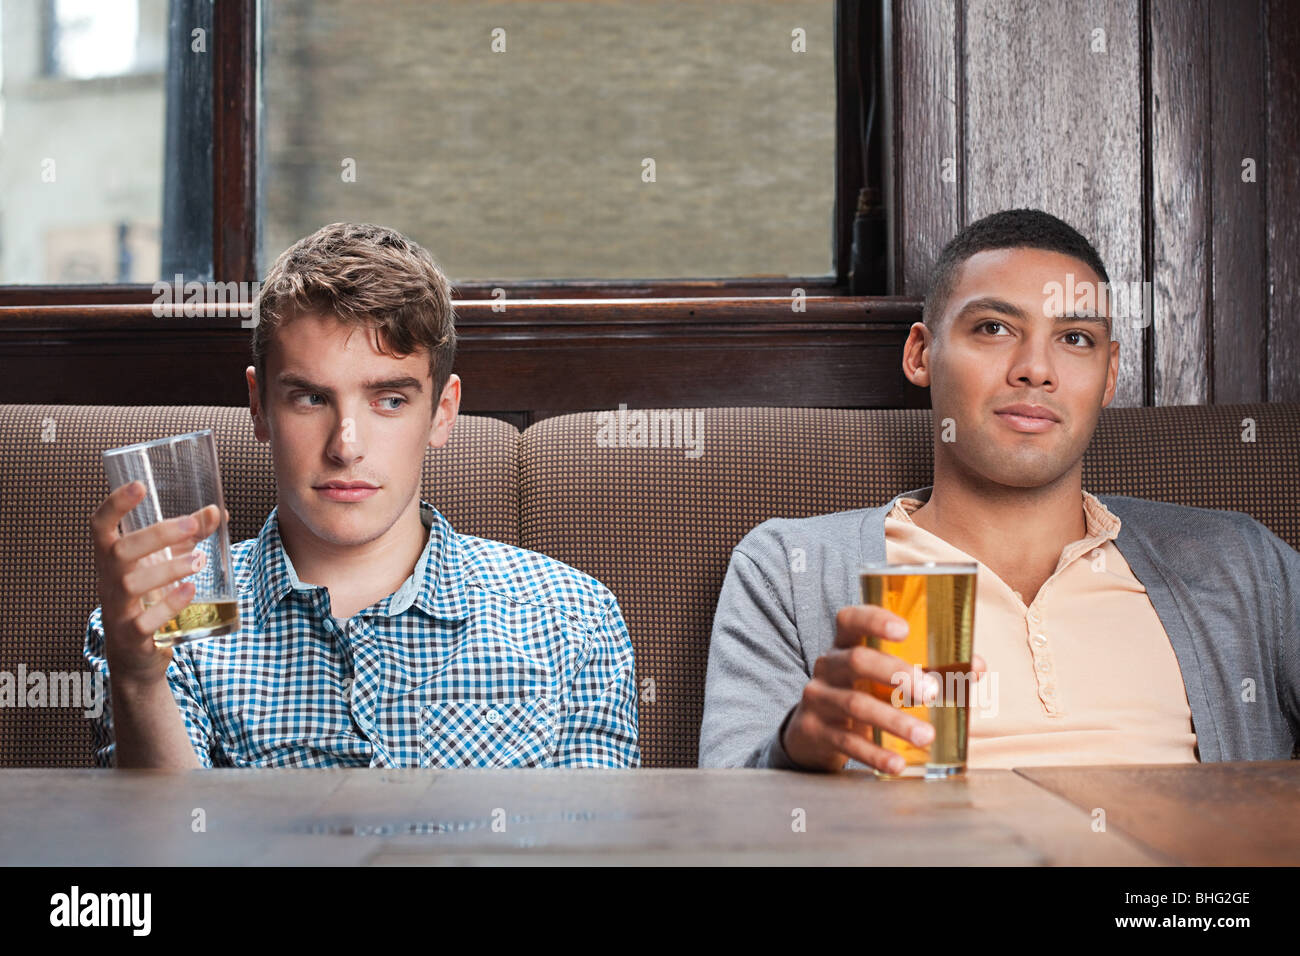 Two young men. Man in Bar.